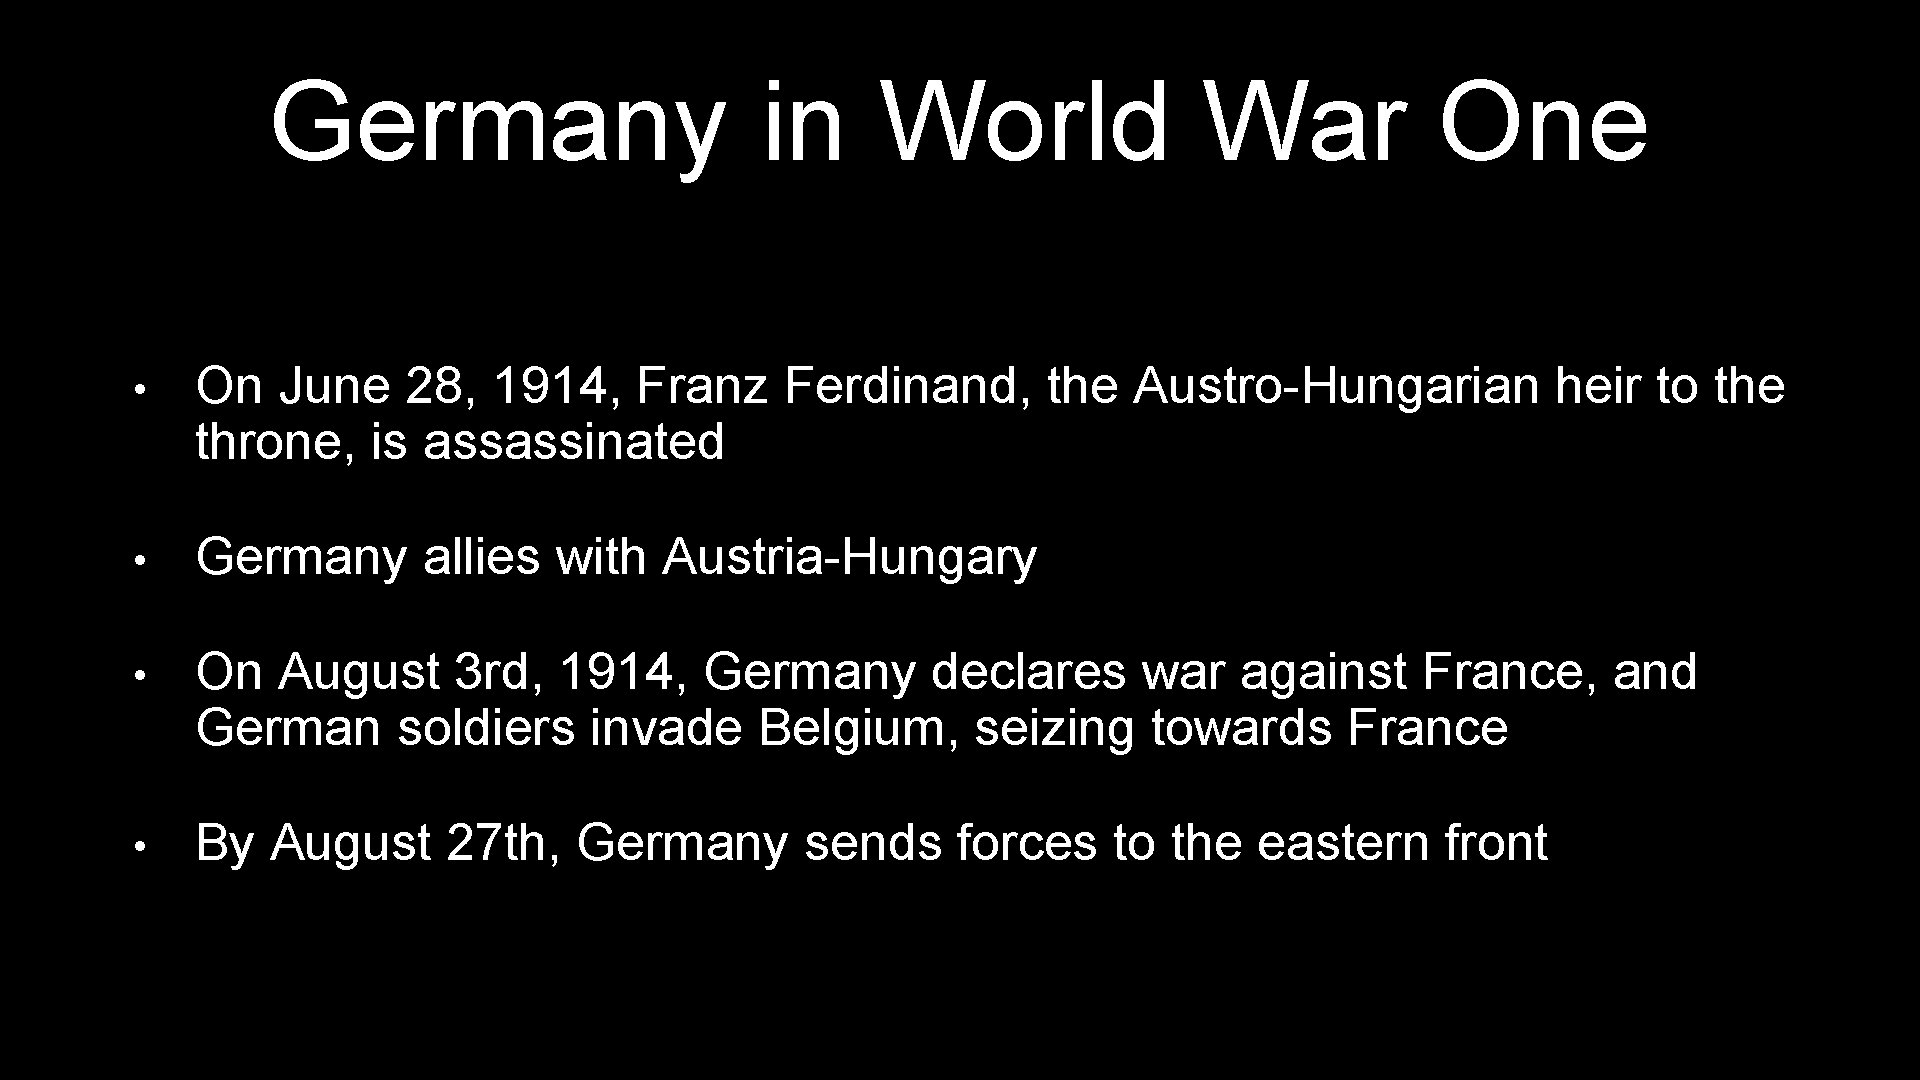 Germany in World War One • On June 28, 1914, Franz Ferdinand, the Austro-Hungarian